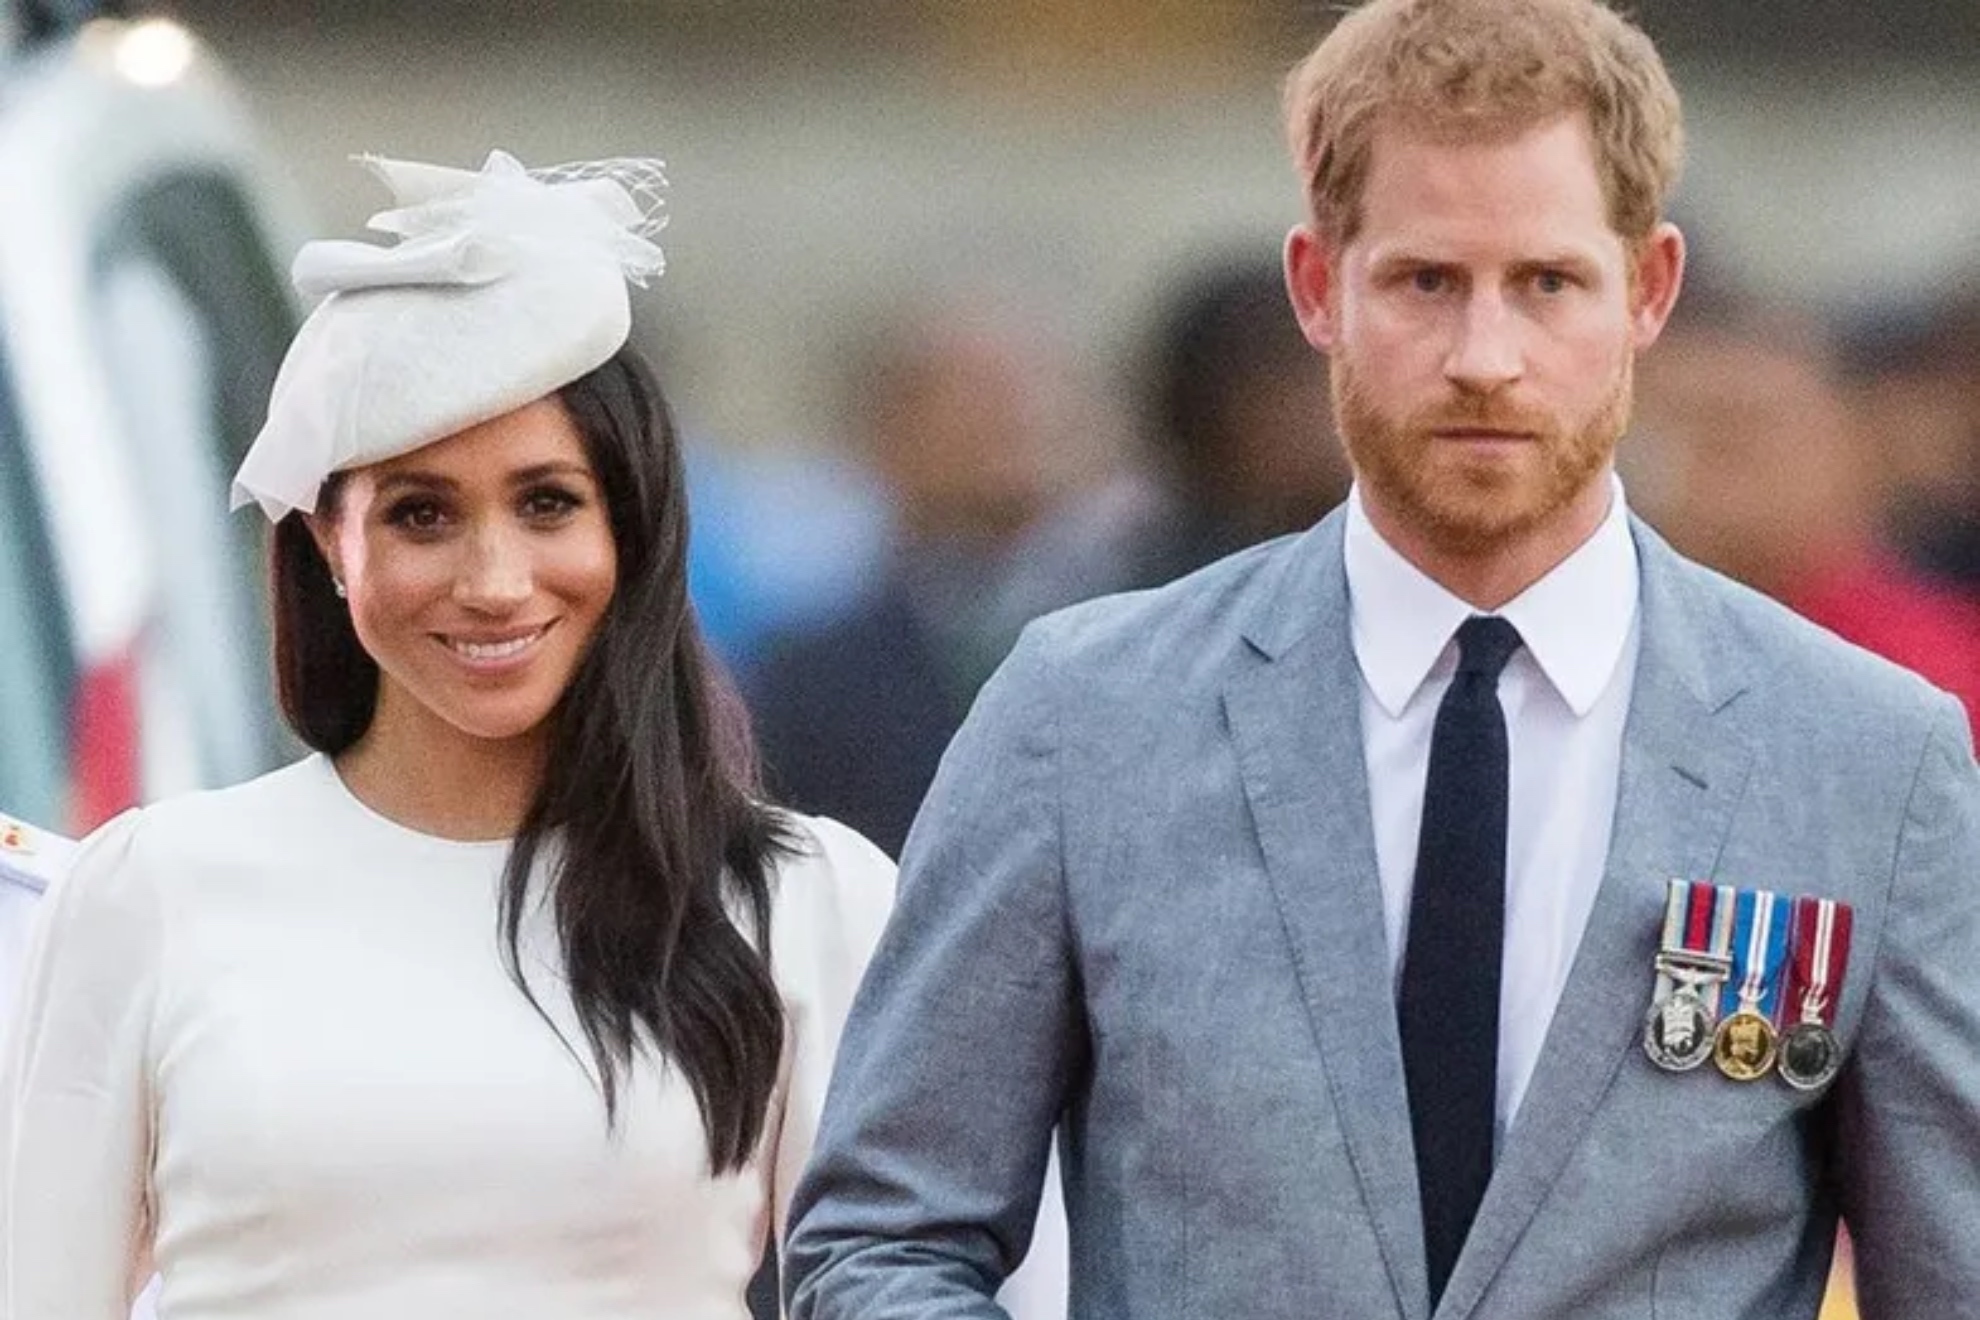 Meghan Markle and Prince Harry subject of racist texts allegedly sent by former police officers